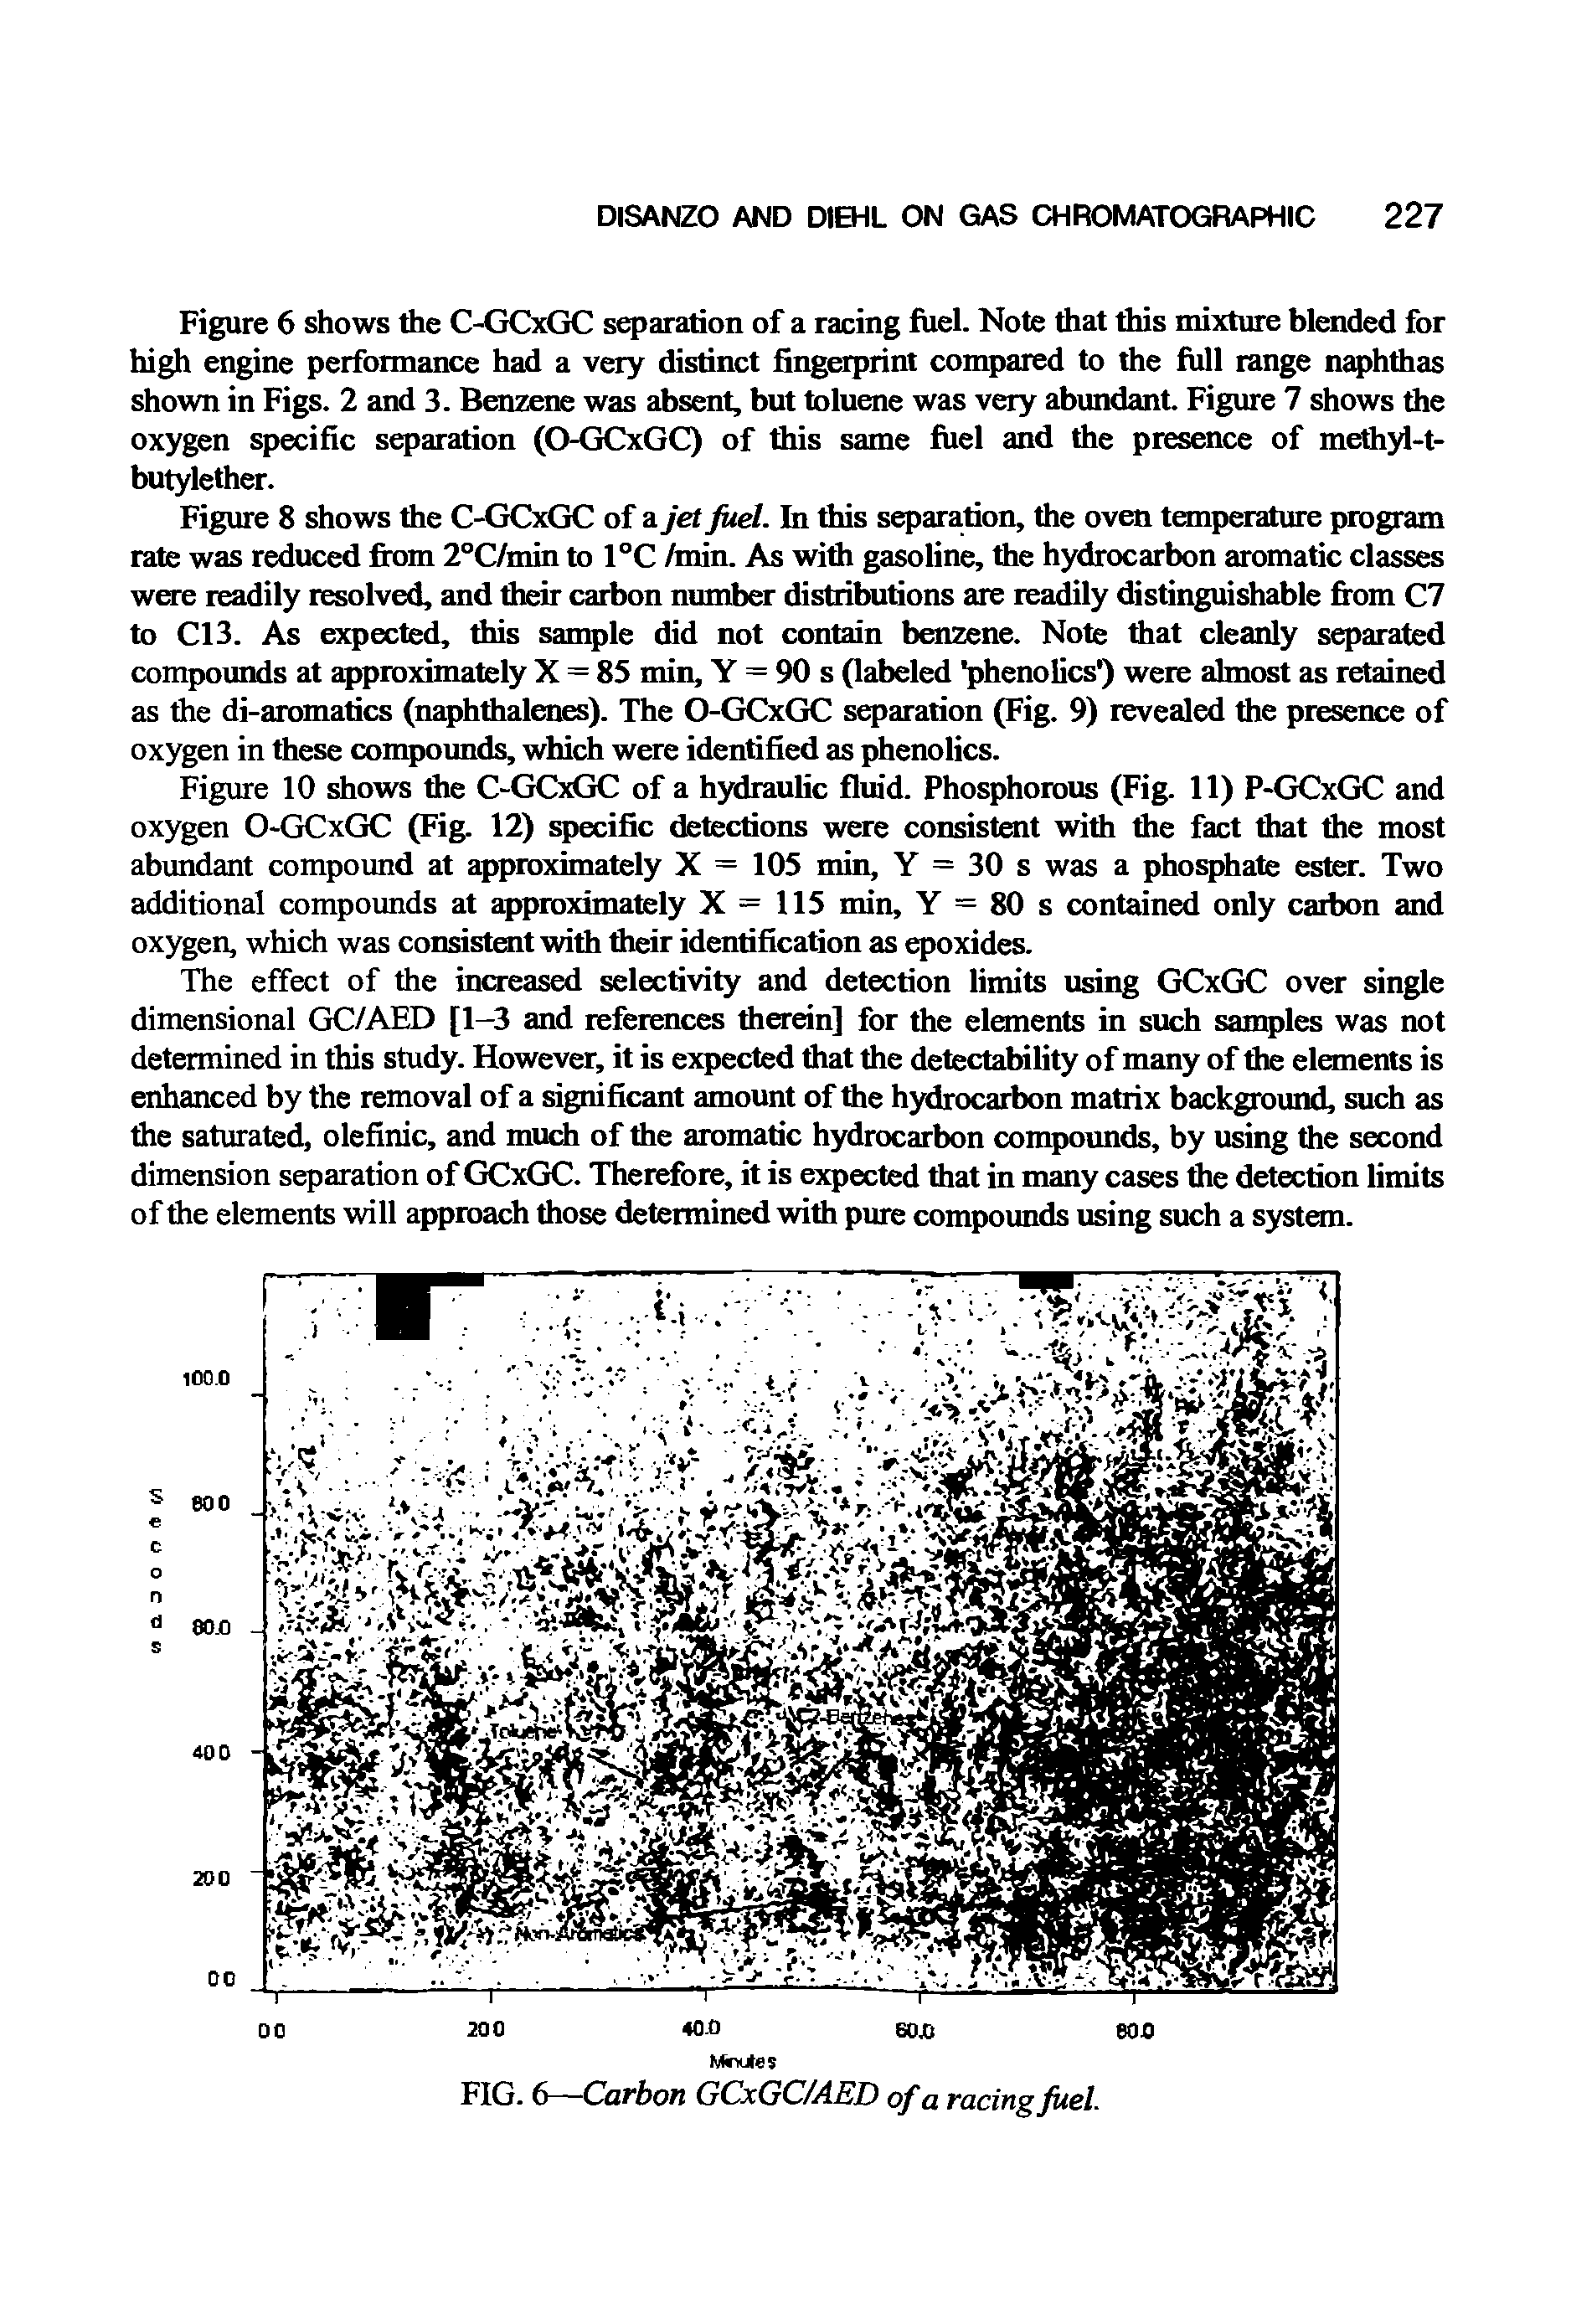 Figure 10 shows die C-GCxGC of a hydraulic fluid. Phosphorous (Fig. 11) P-GCxGC and oxygen 0-GCxGC (Fig. 12) specific detections were consistent with die fact diat the most abundant compound at approximately X = 105 min, Y = 30 s was a phosphate ester. Two additional compounds at approximately X = 115 min, Y = 80 s contained only carbon and oxygen, which was consistent with dieir identification as epoxides.